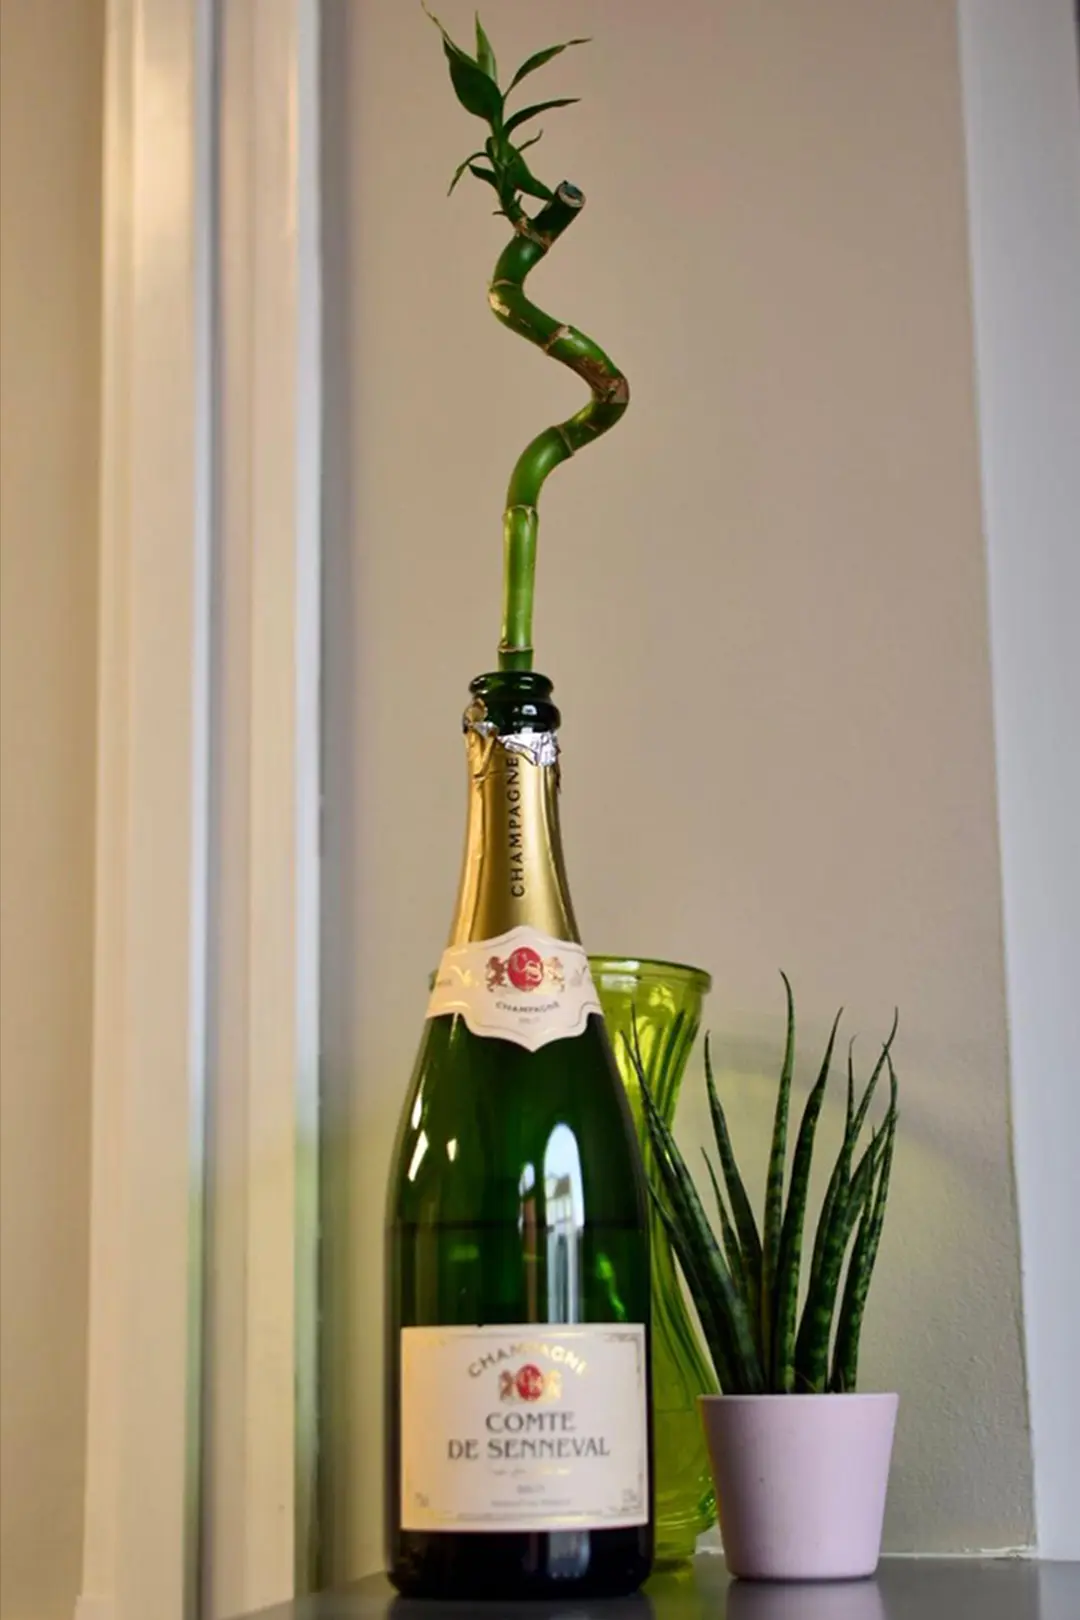 Photo showing opening bottle of champage with a bamboo plant in the top